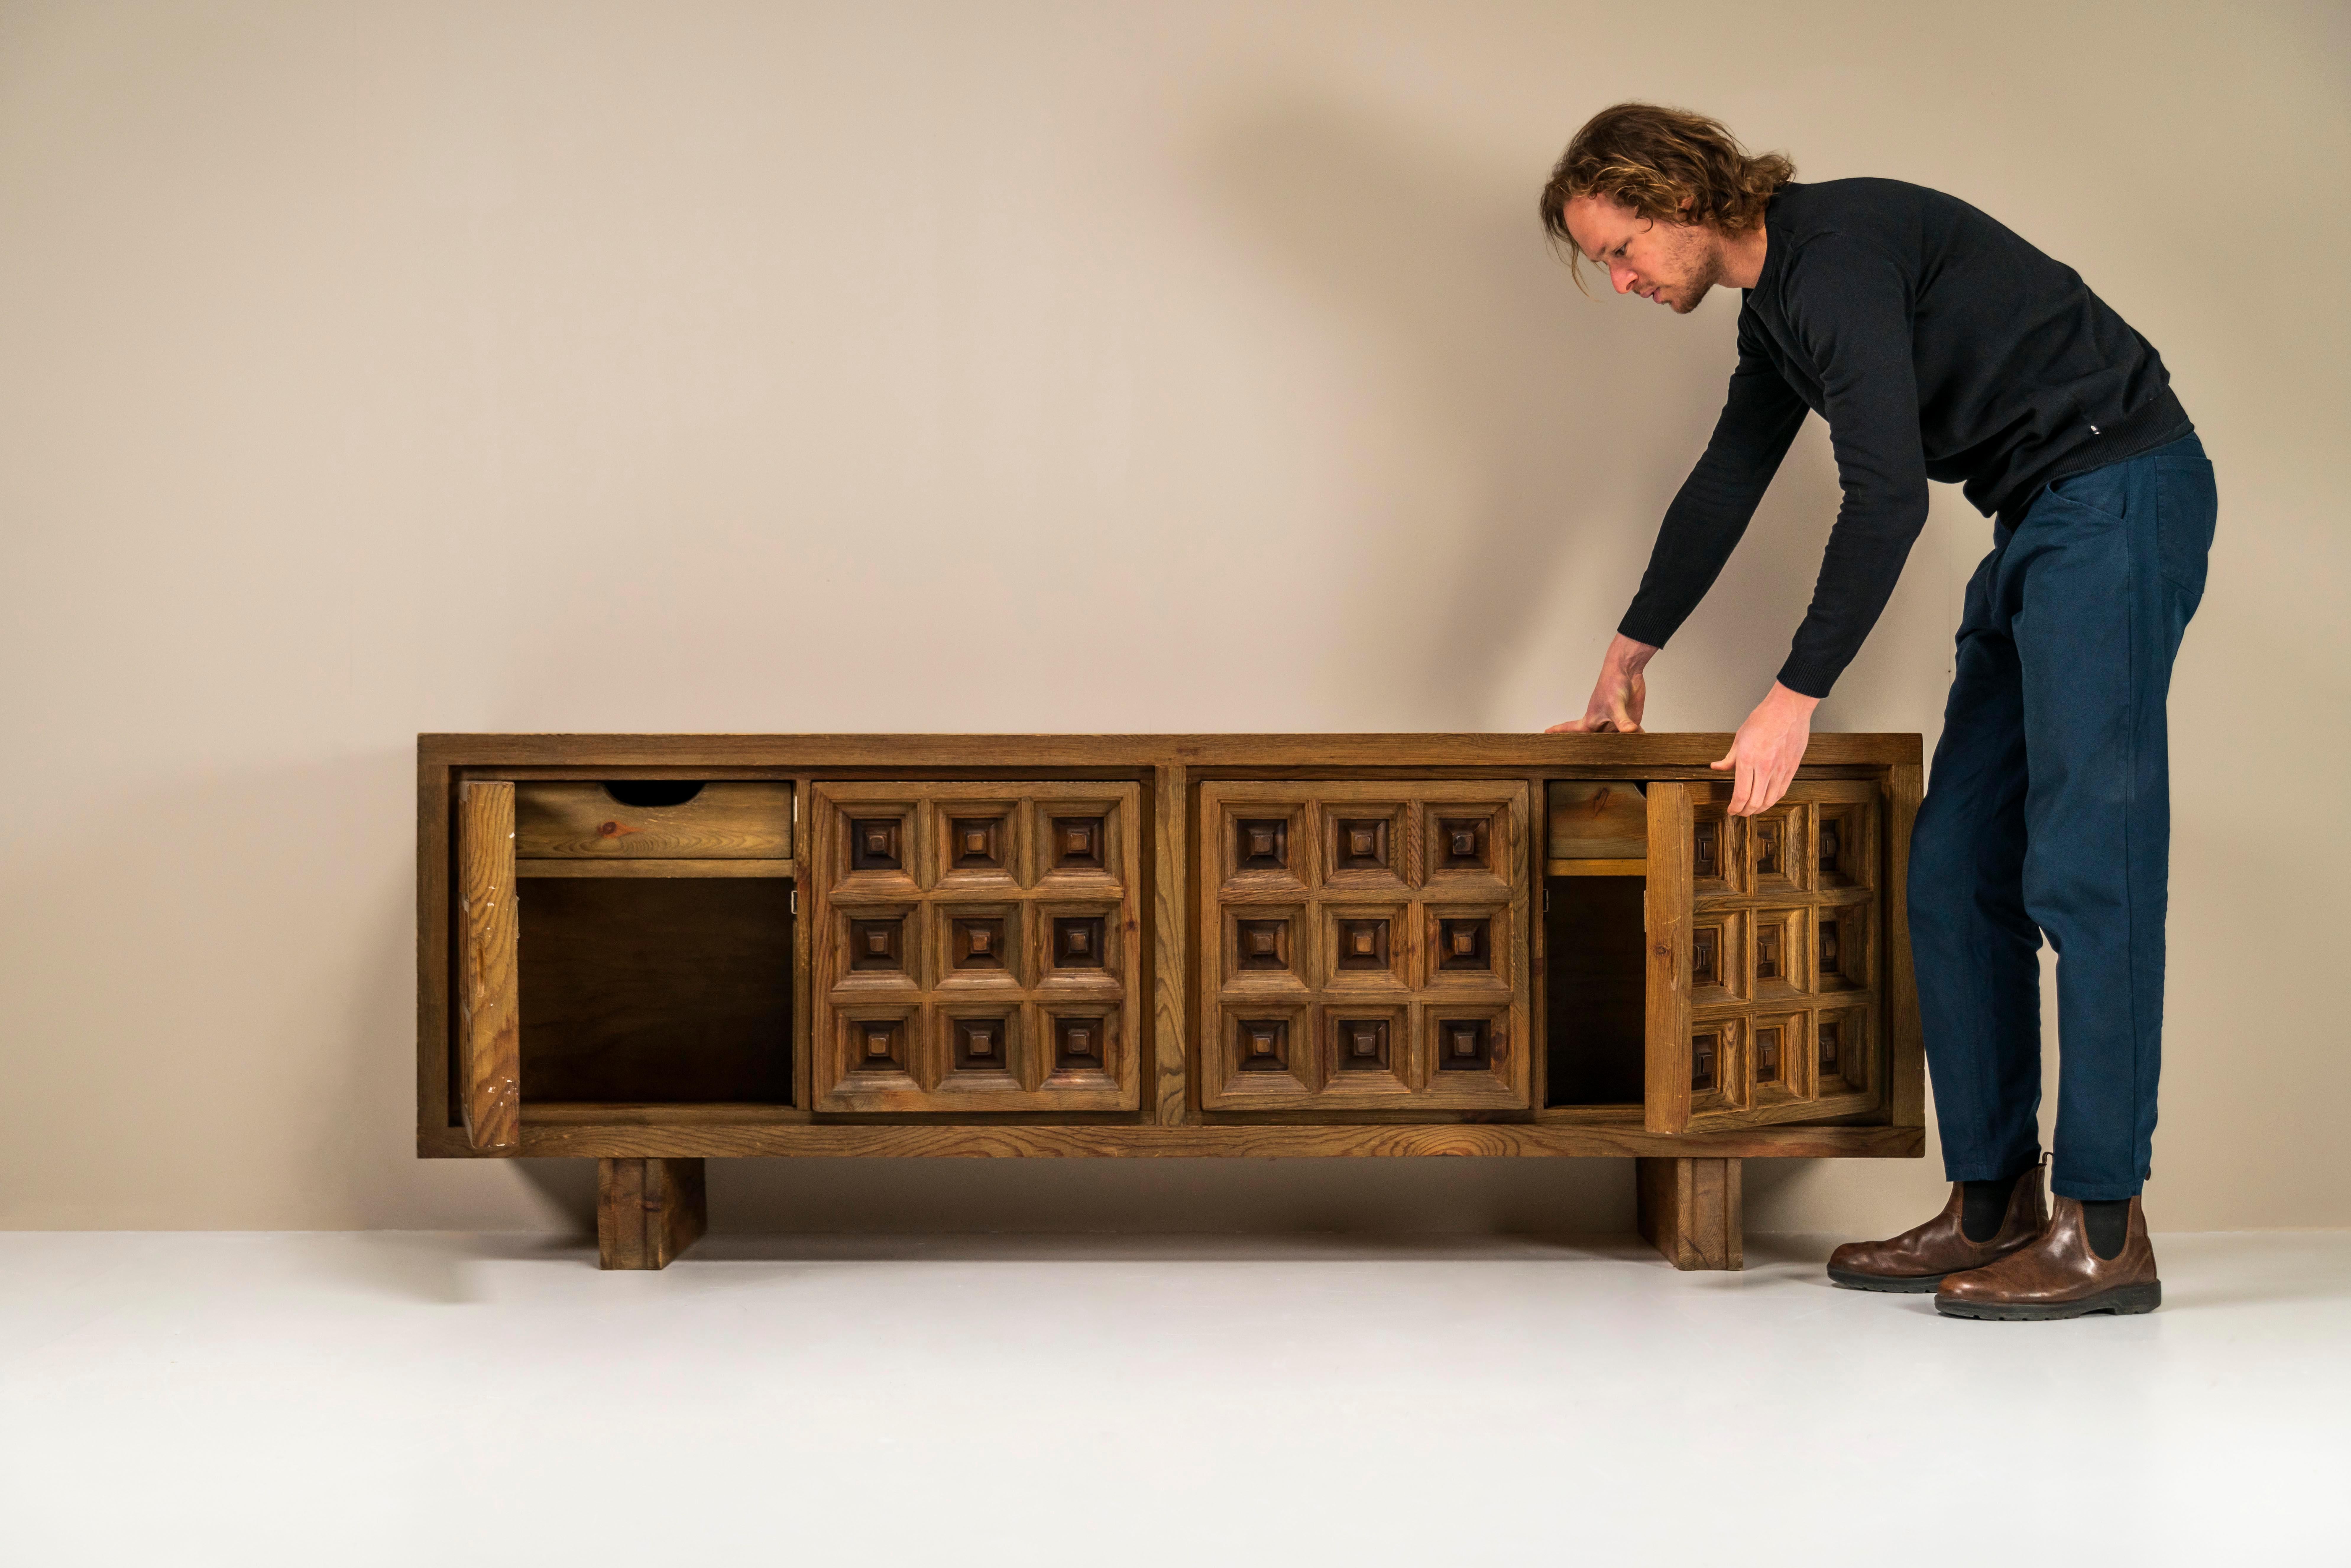 Biosca sideboard in stained pine. This sideboard from the hand of the Spanish manufacturer Biosca is an absolute paragon of the brutalism style applied in furniture. Not much is known about this illustrious manufacturer and the available examples